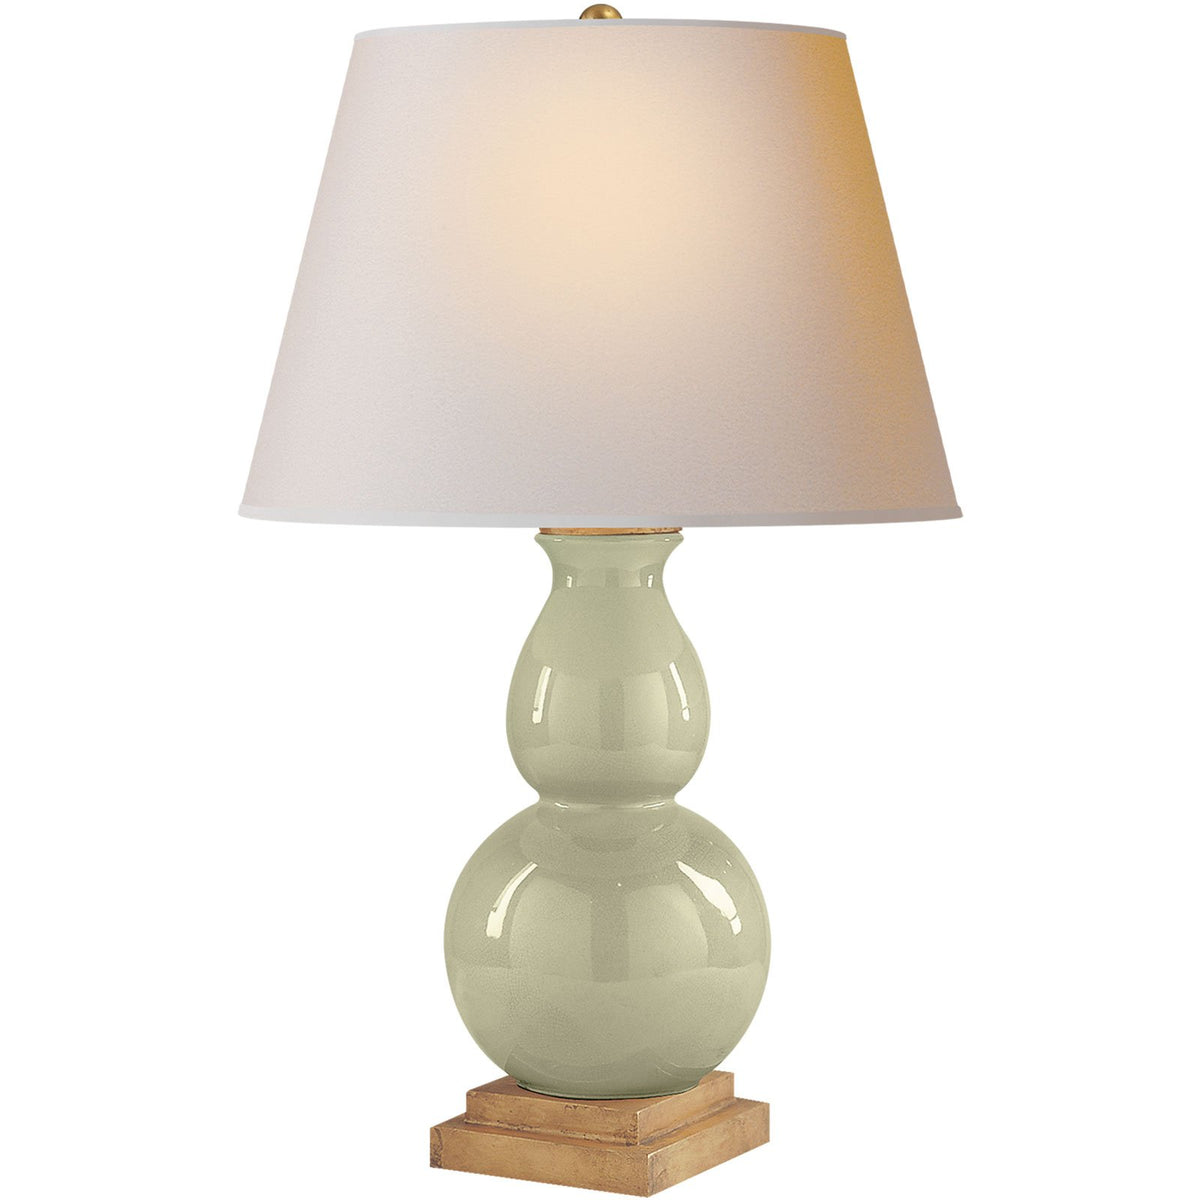 Celadon Gourd Small Table Lamp